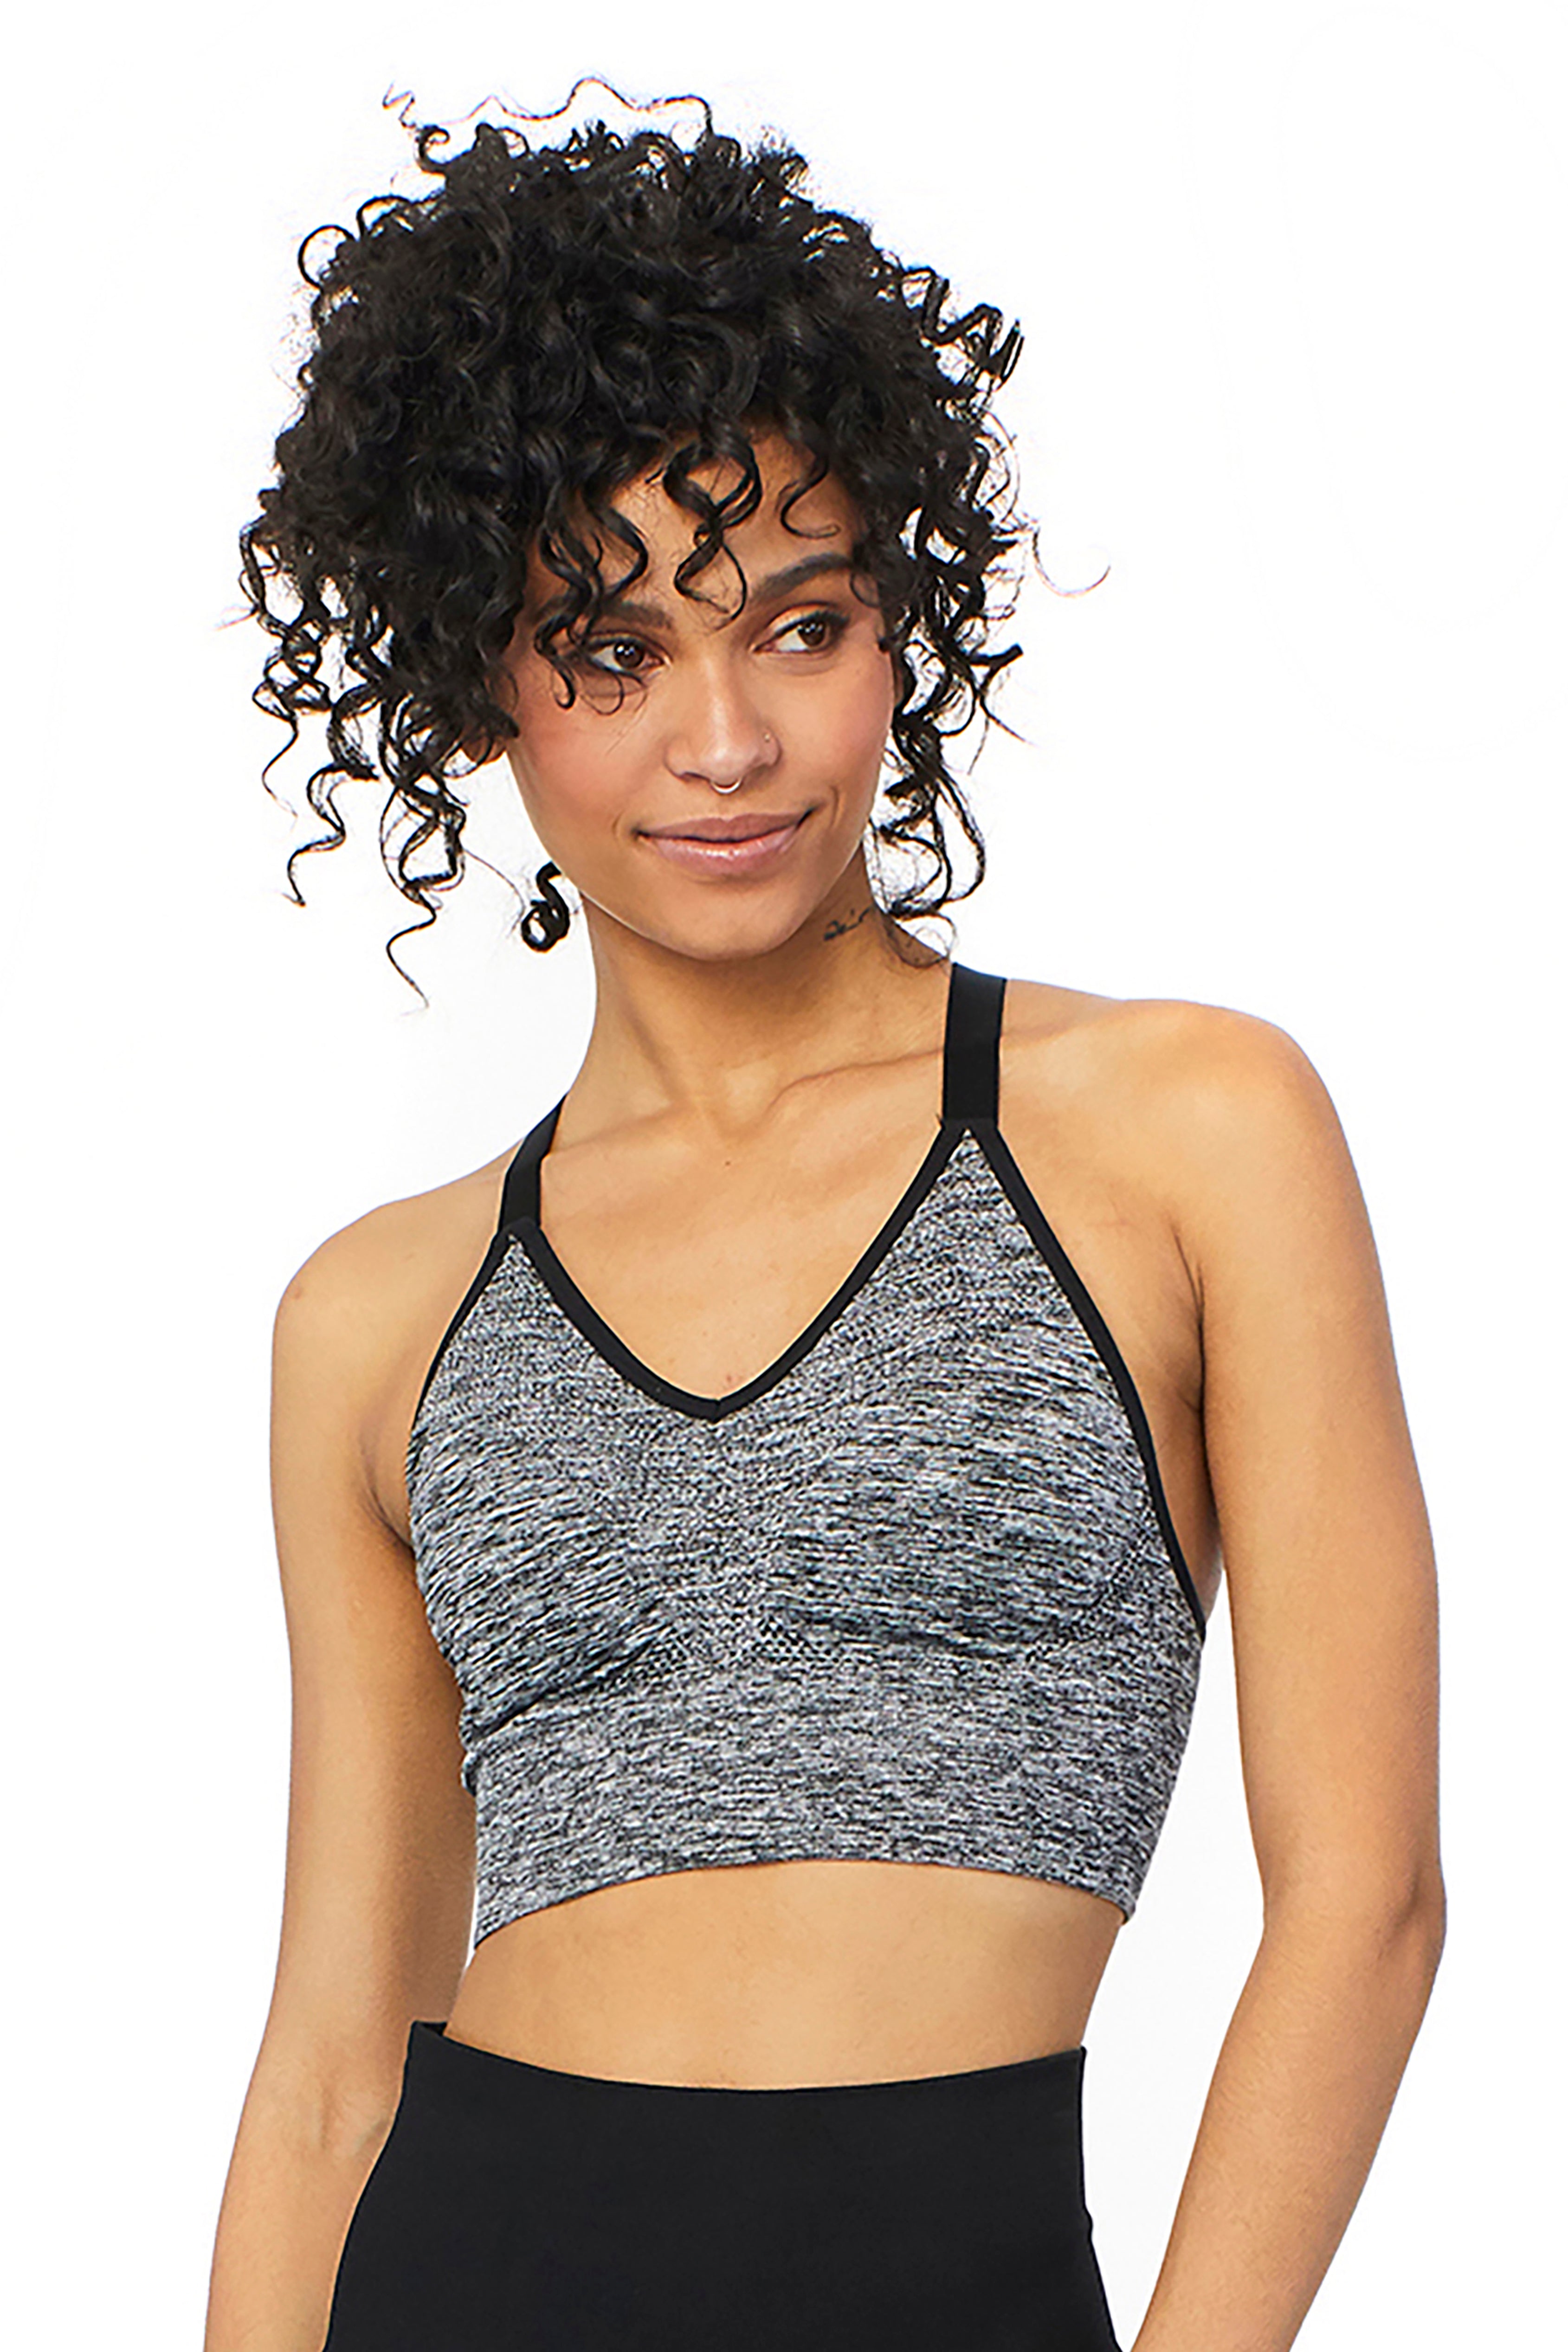 Buy online Blue Nylon Sports Bra from lingerie for Women by Parkha for ₹419  at 79% off